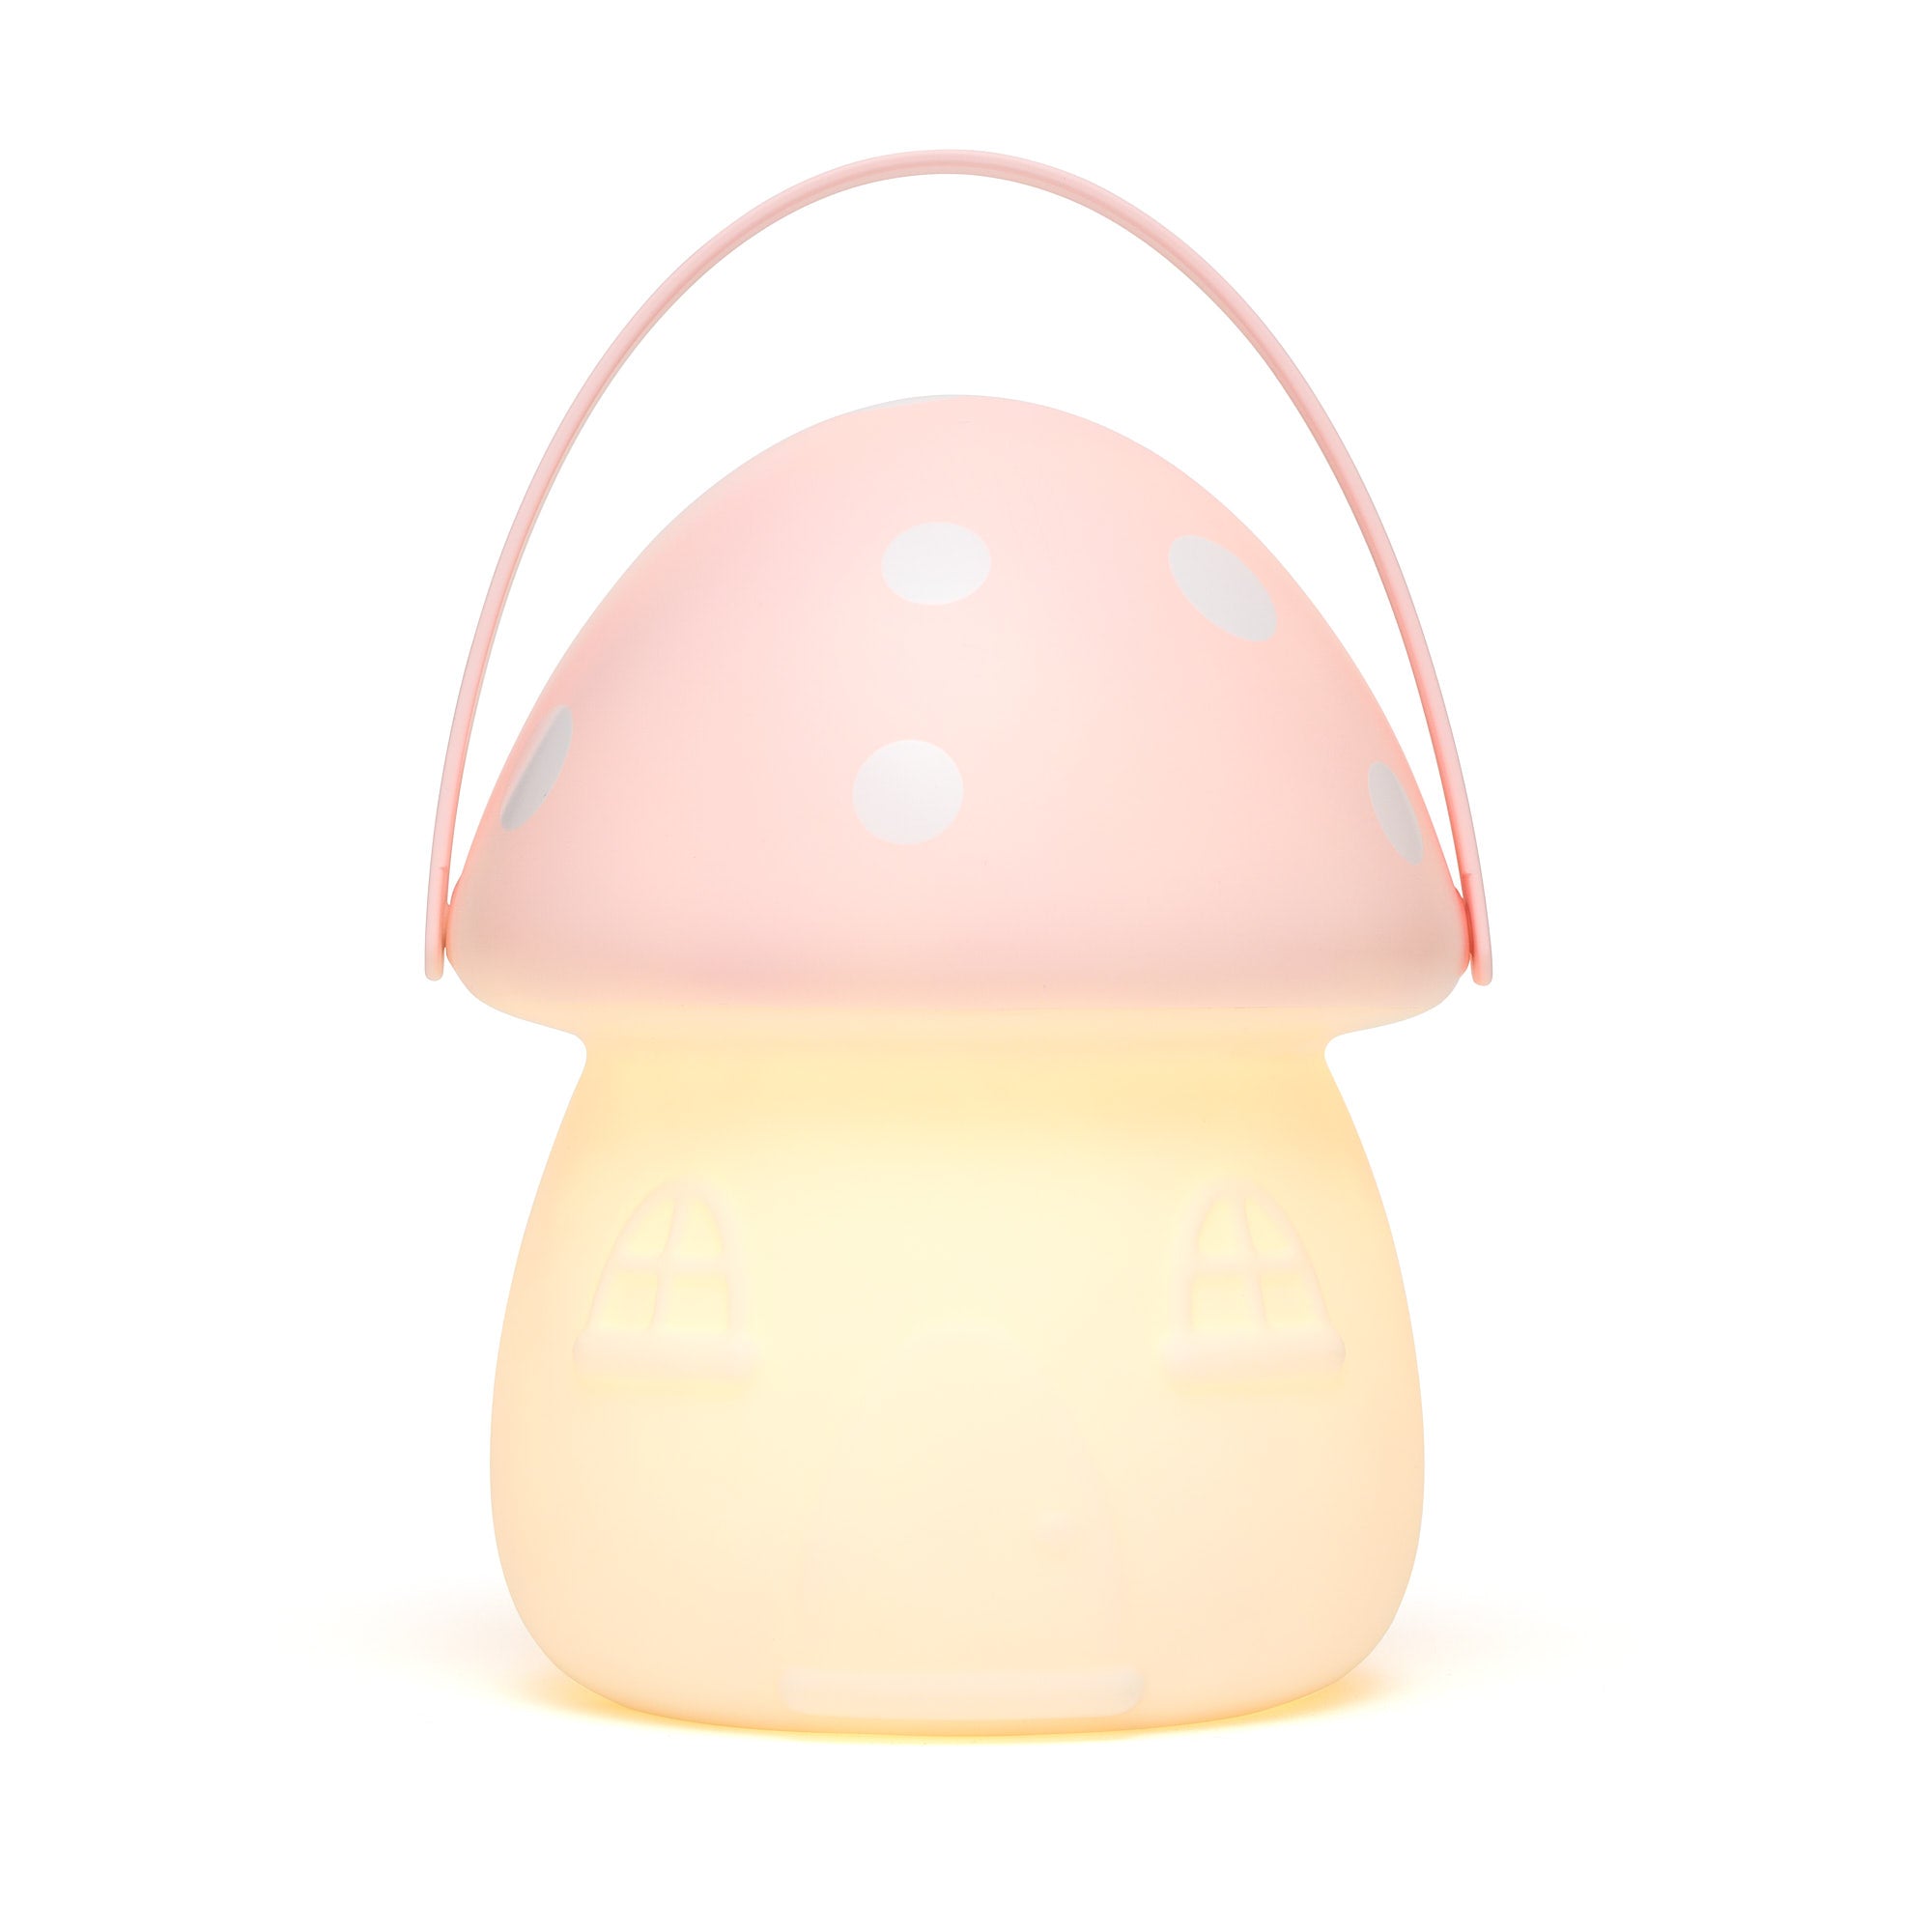 Fairy House Carry Lantern - Pink & White PRE-ORDER NOW